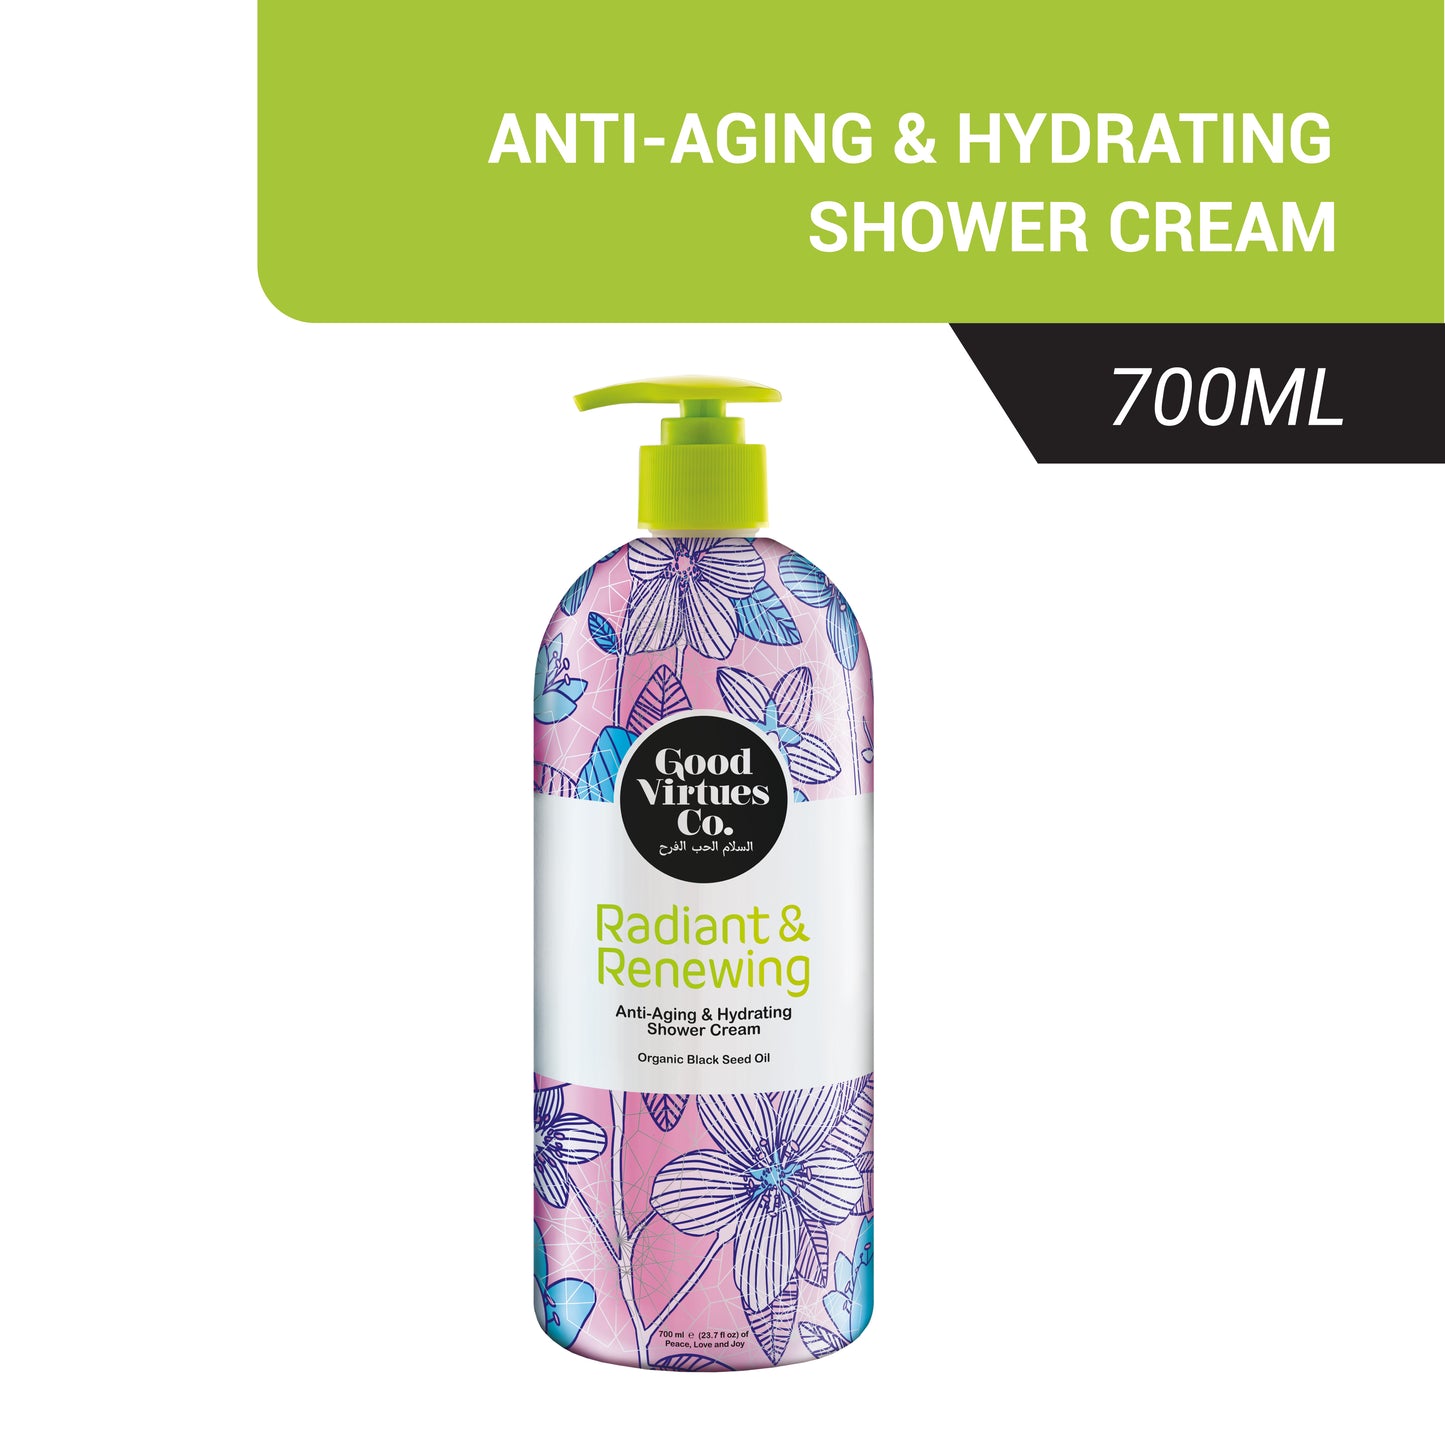 Good Virtues Co. Radiant & Renewing Anti-Aging & Hydrating Shower Cream For Women,